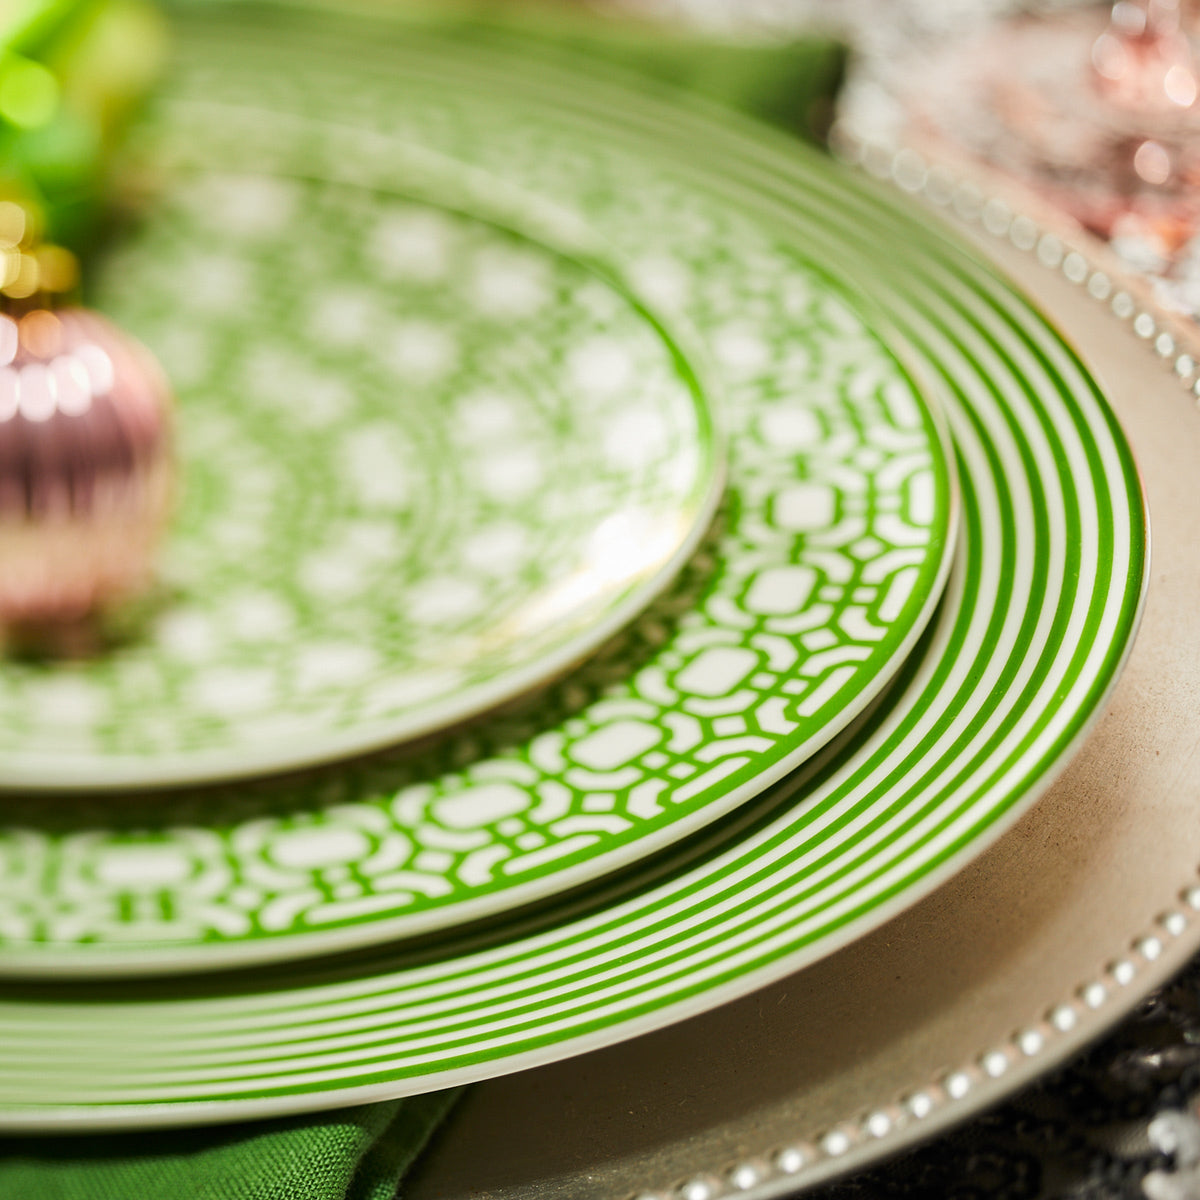 A close-up image of Newport Stripe Verde Rimmed Dinner Plates by Caskata Artisanal Home, made of high-fired porcelain, stacked on a green napkin and a silver charger plate.